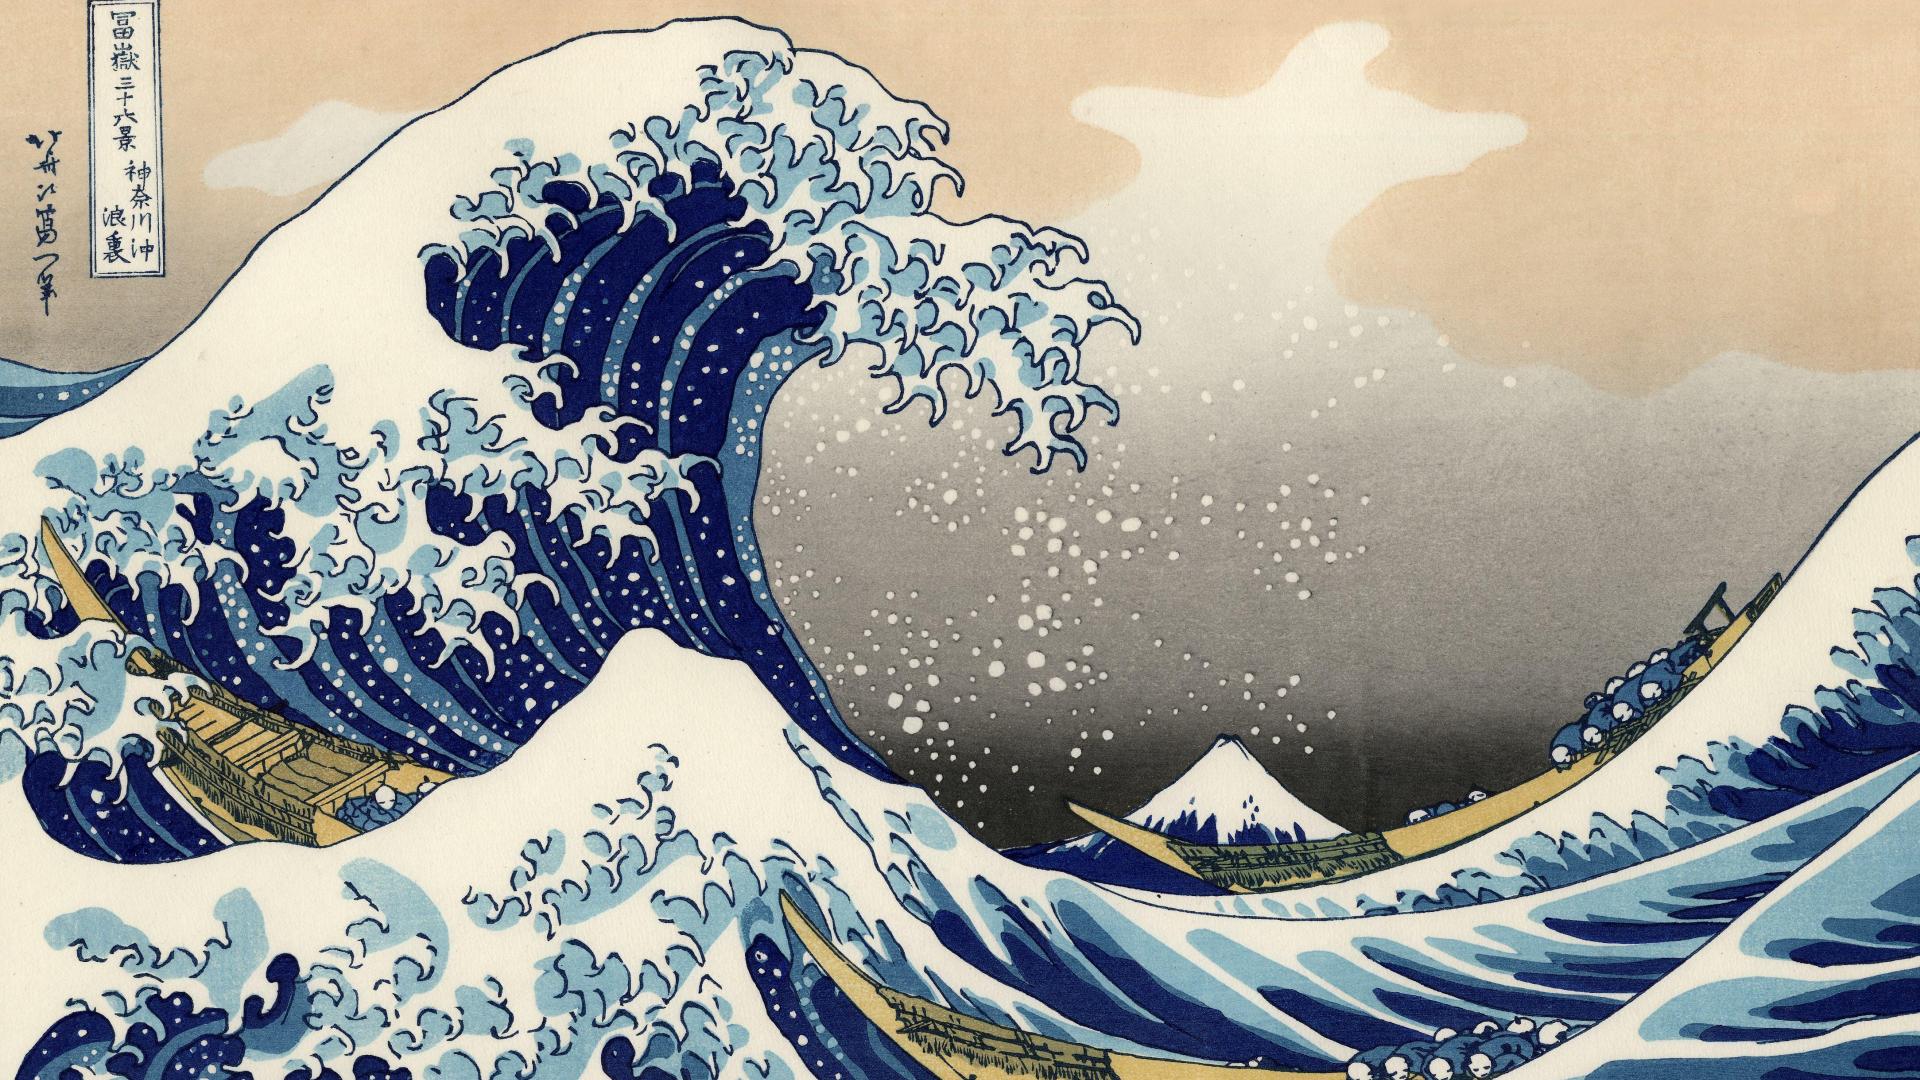 The great wave off kanagawa - (#76248) - High Quality and ...